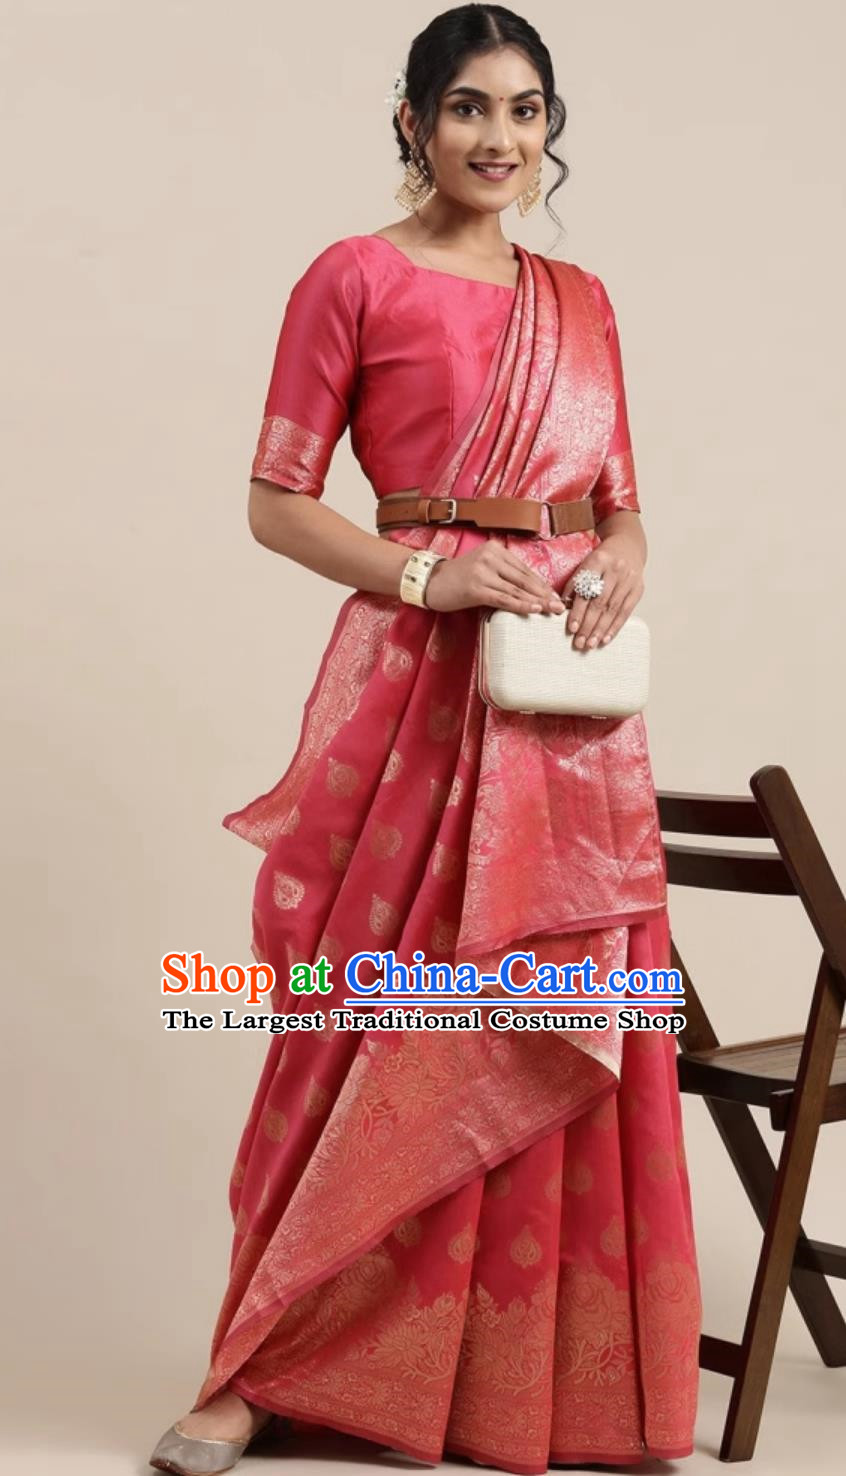 Traditional Woman Sari India Festival Clothing Indian National Costume Pink Dress